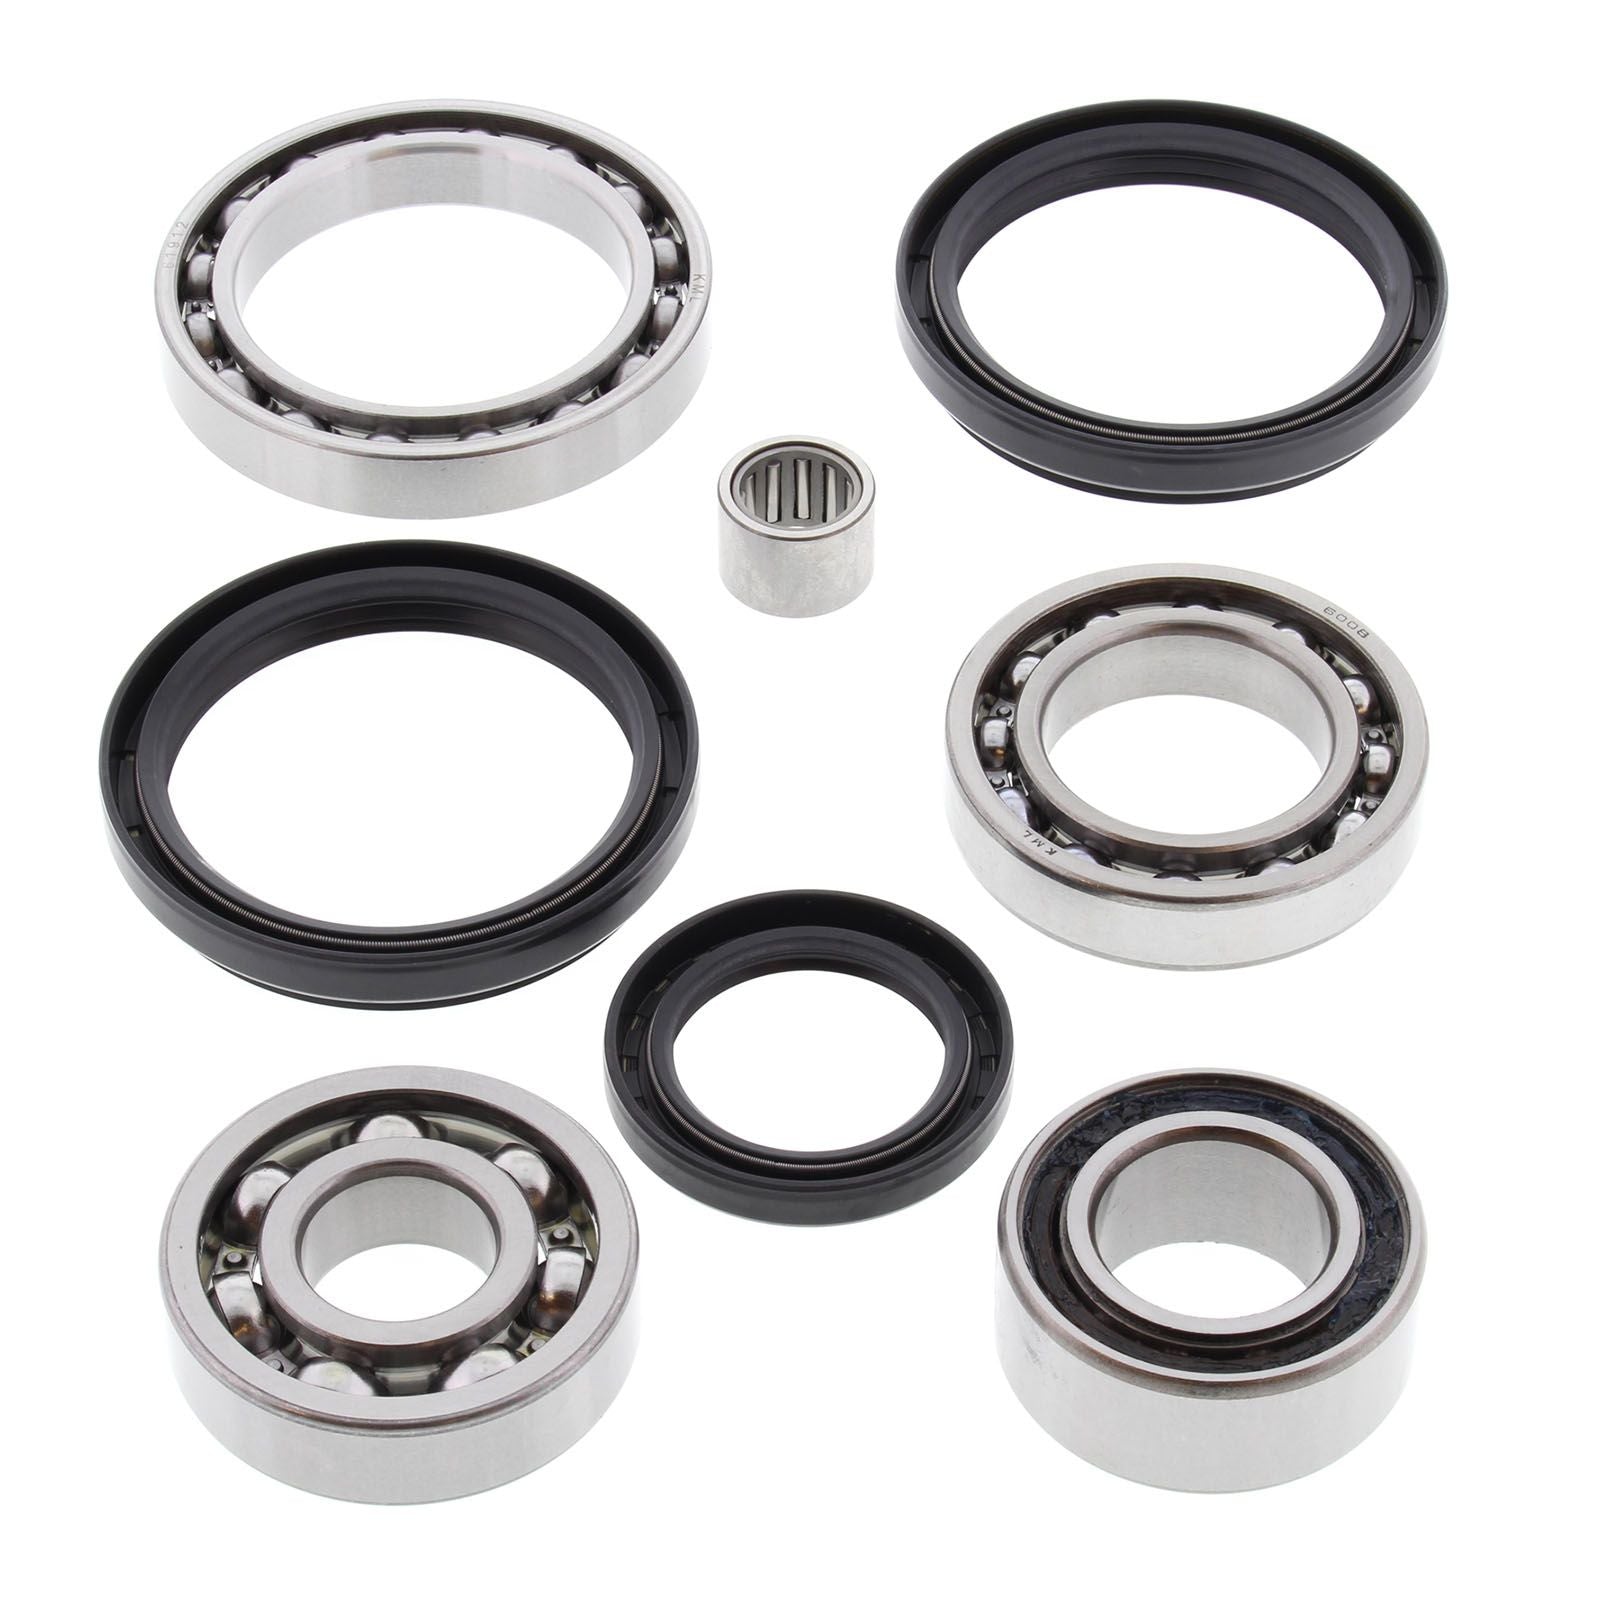 New ALL BALLS Racing Differential Bearing Kit #AB252051